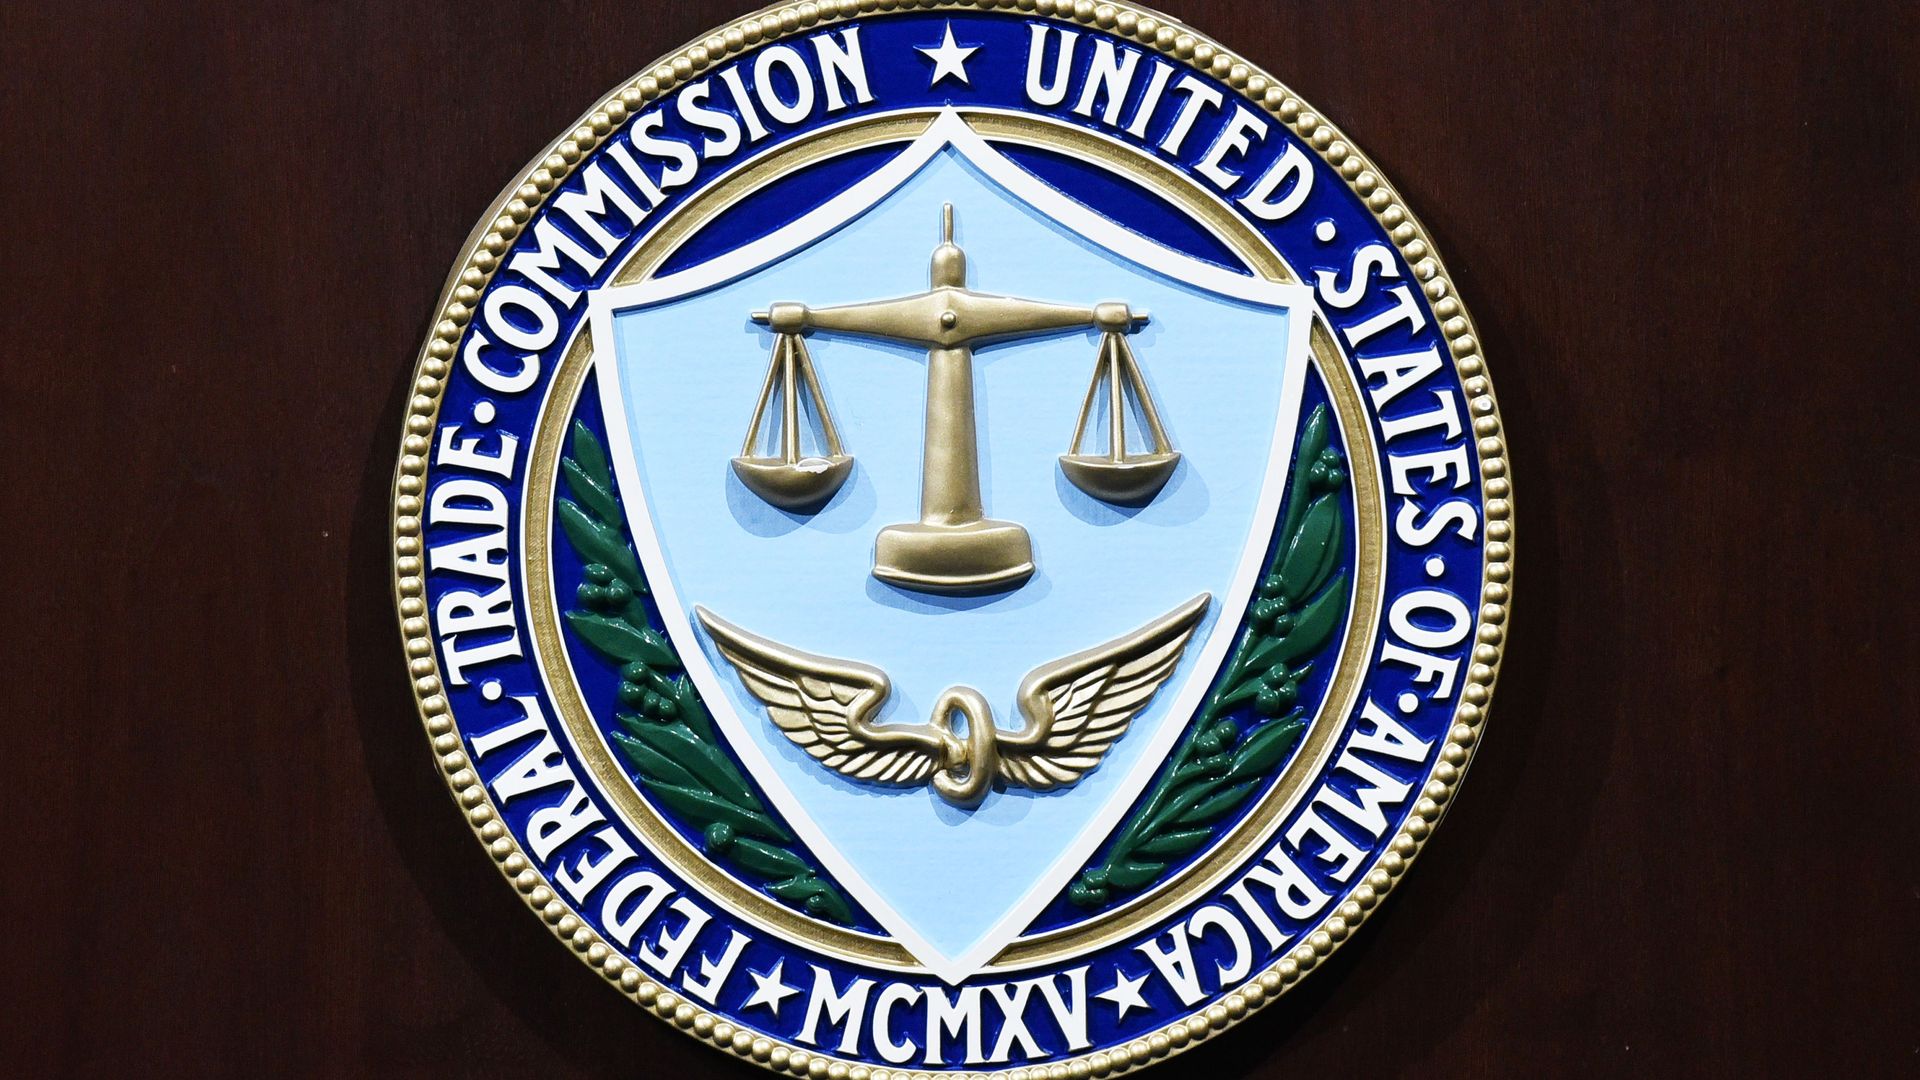 The seal of the FTC headquarters in Washington, D.C.